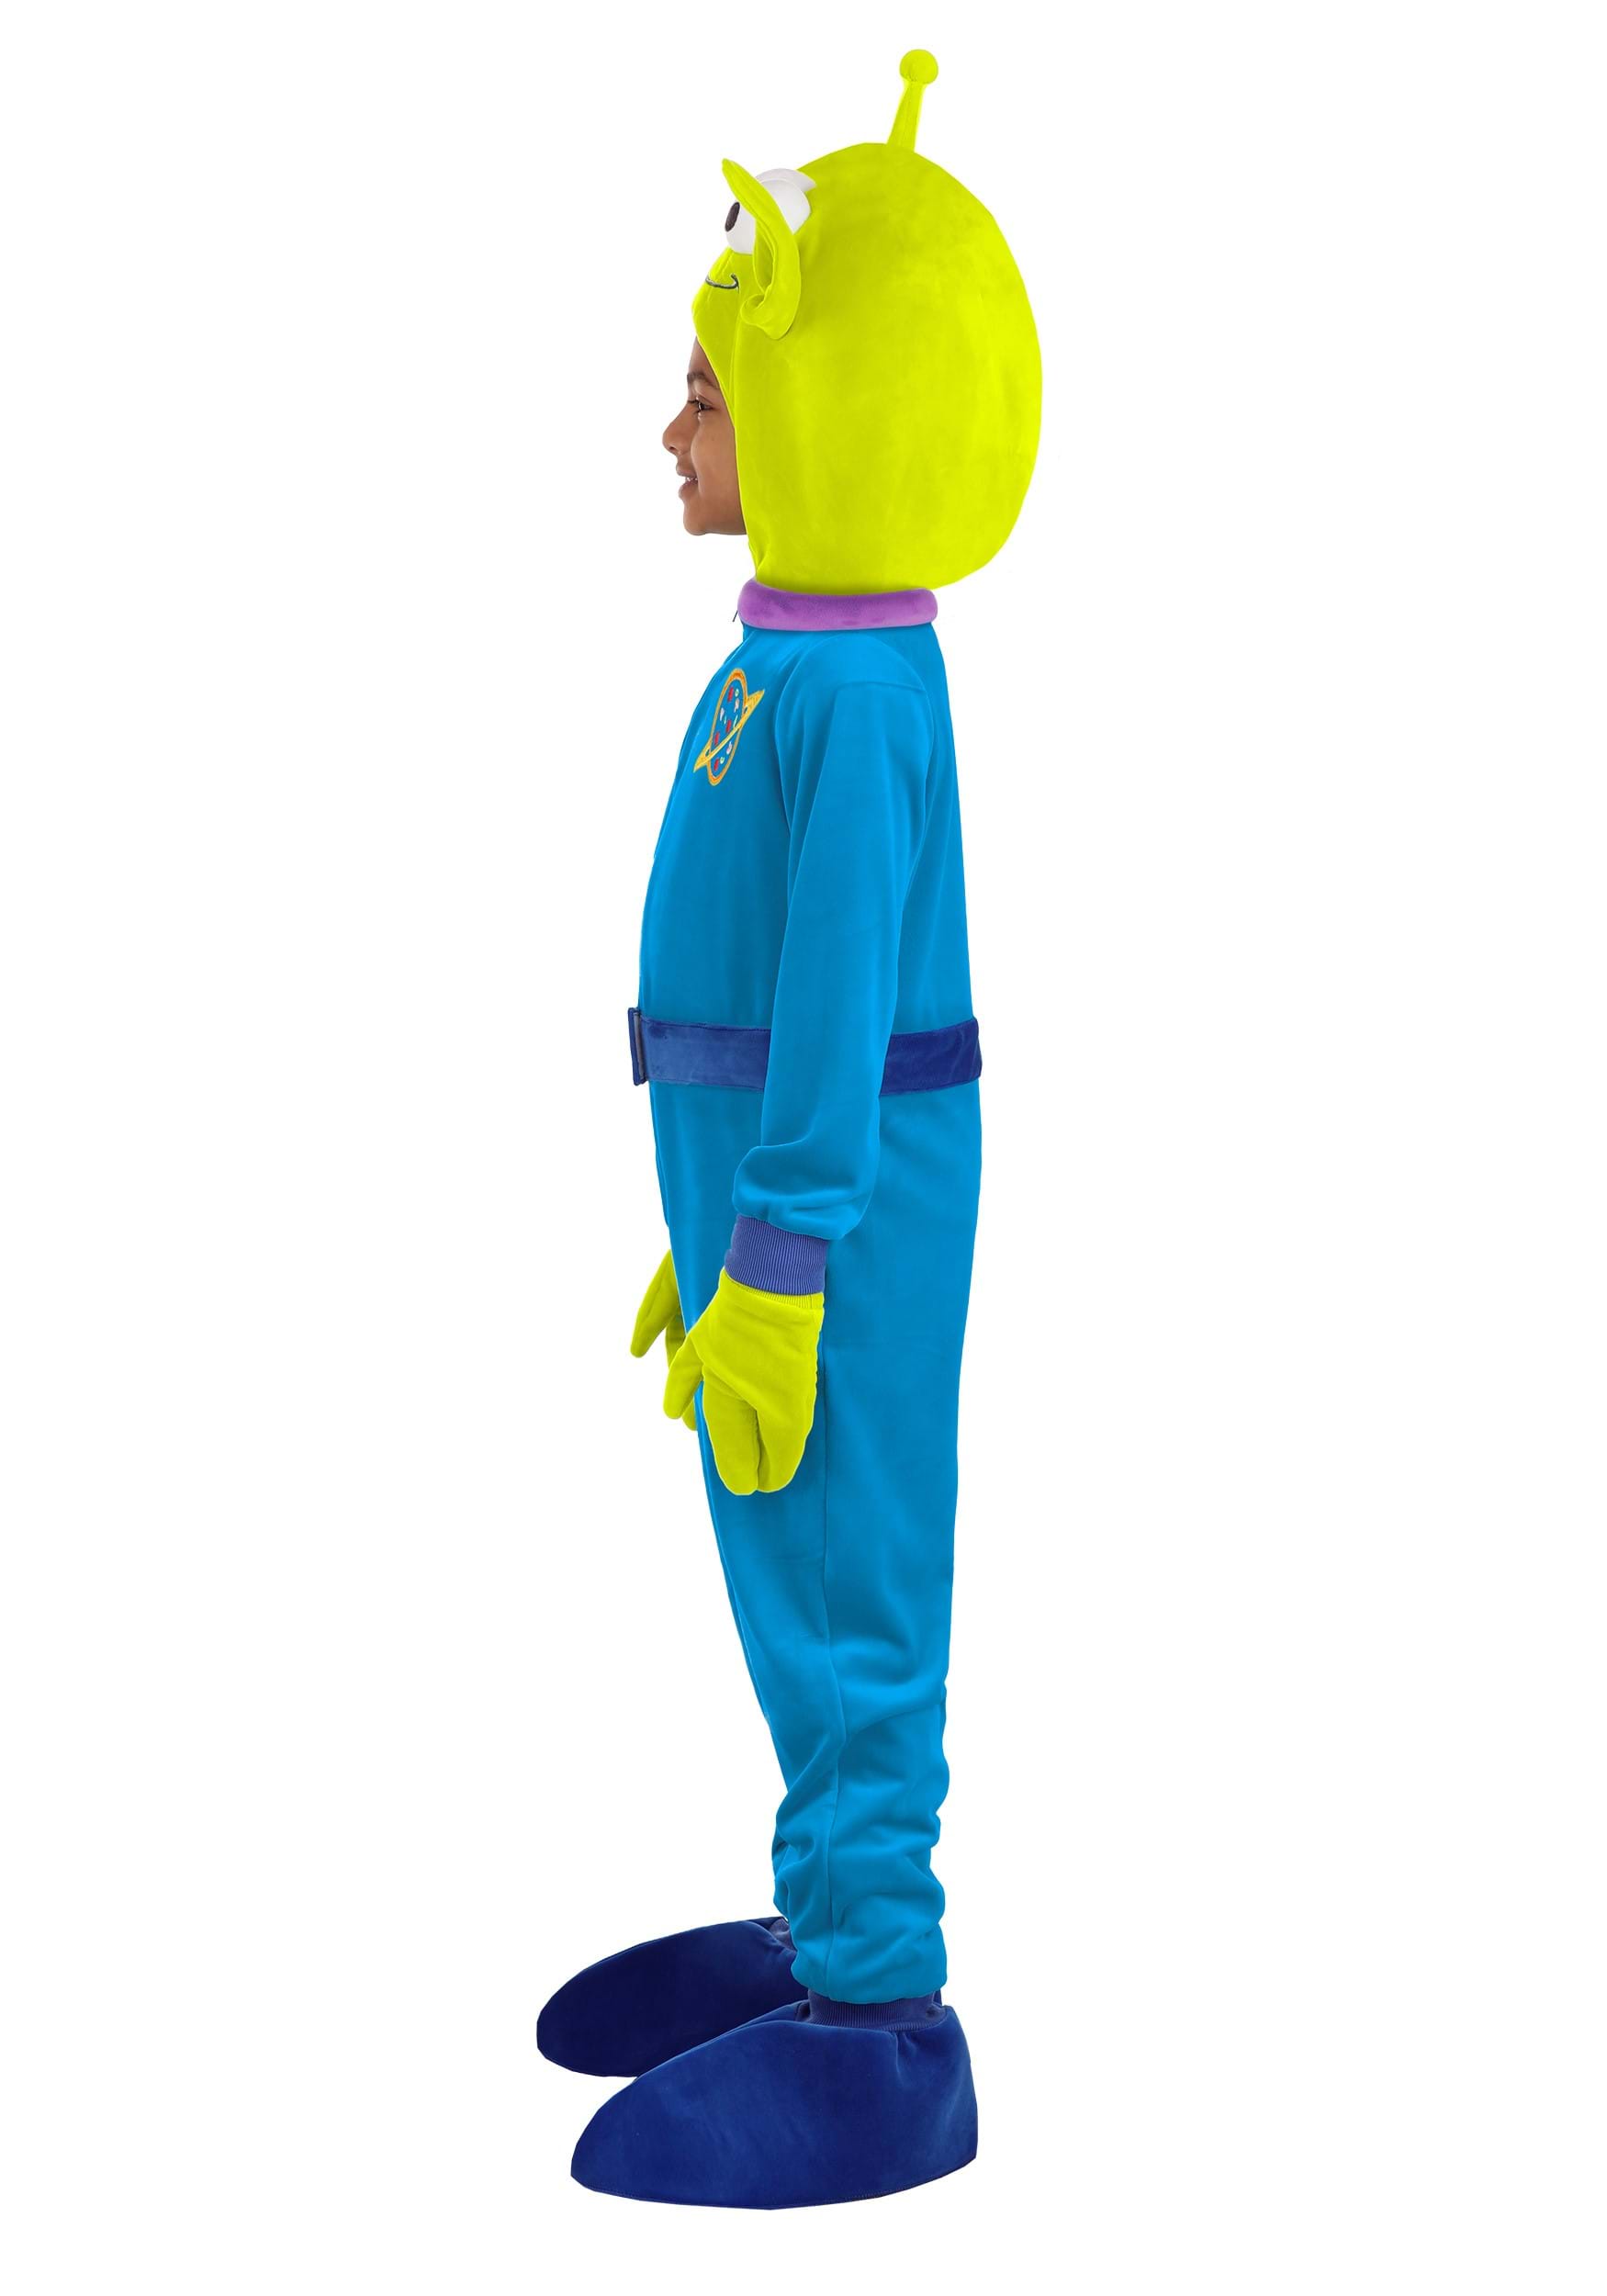 Disney And Pixar Toy Story Alien Costume For Kids